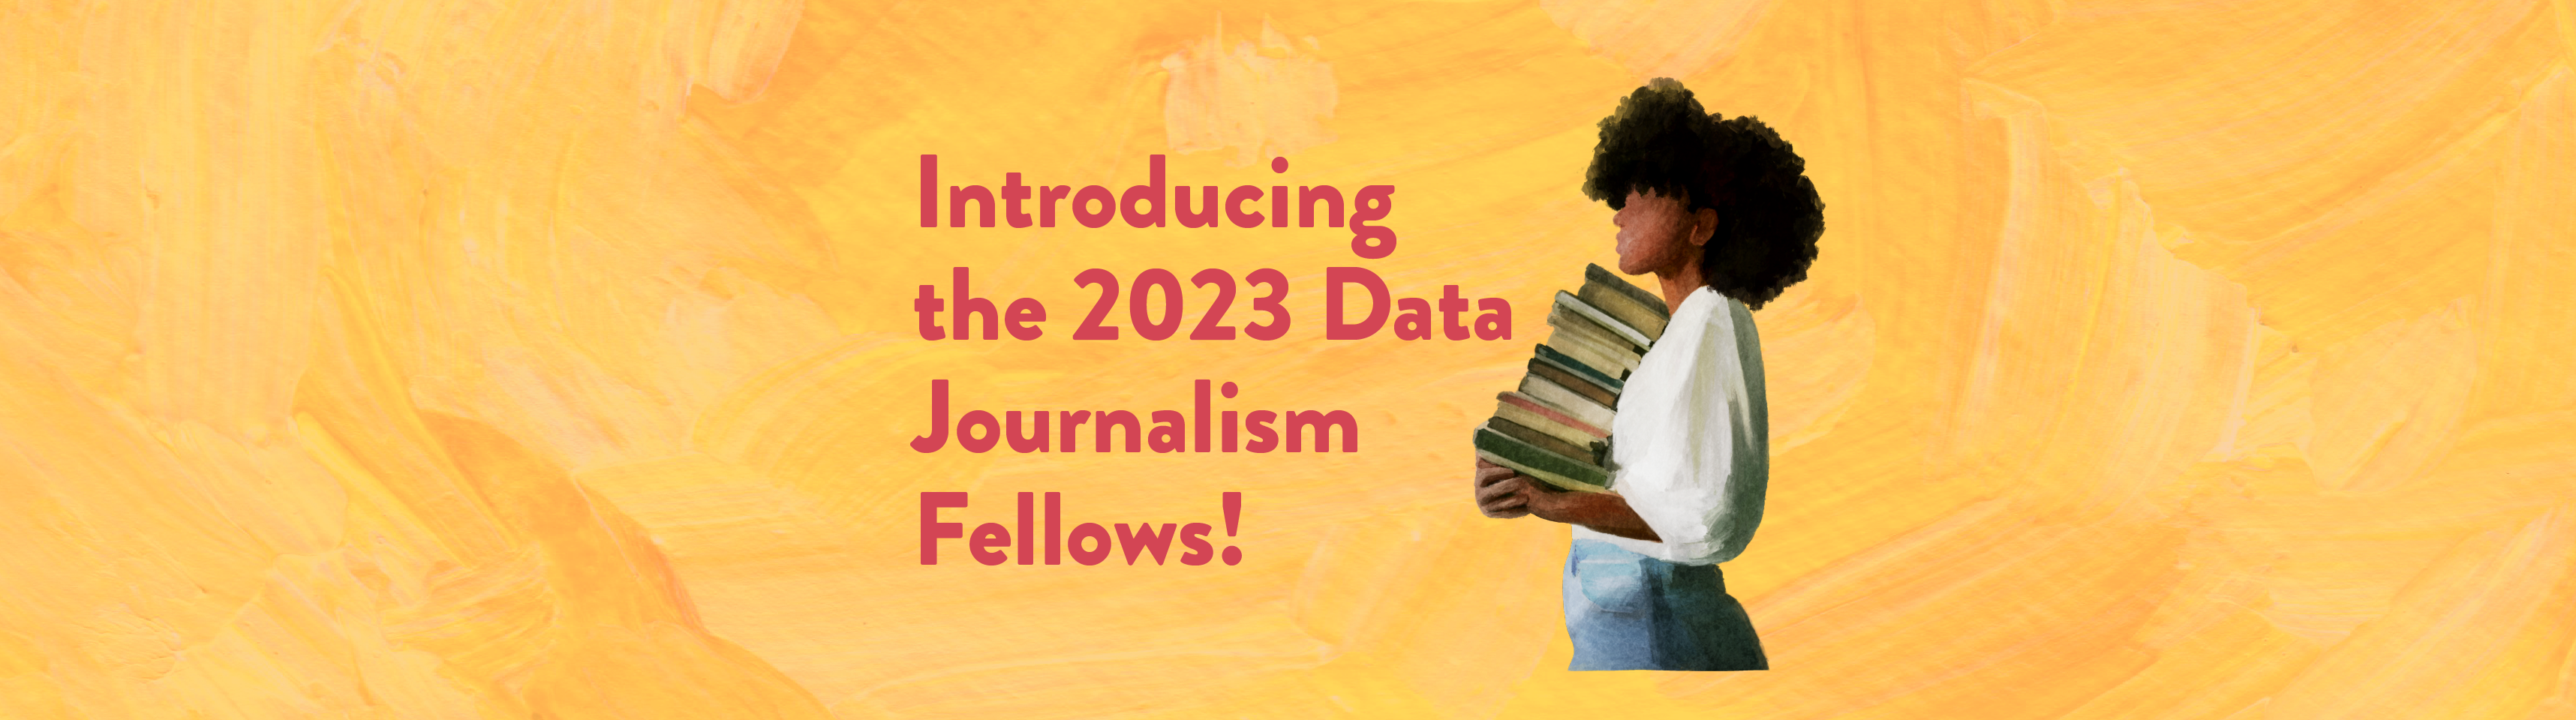 Introducing the 2023 Data Journalism Fellows in Latin America 